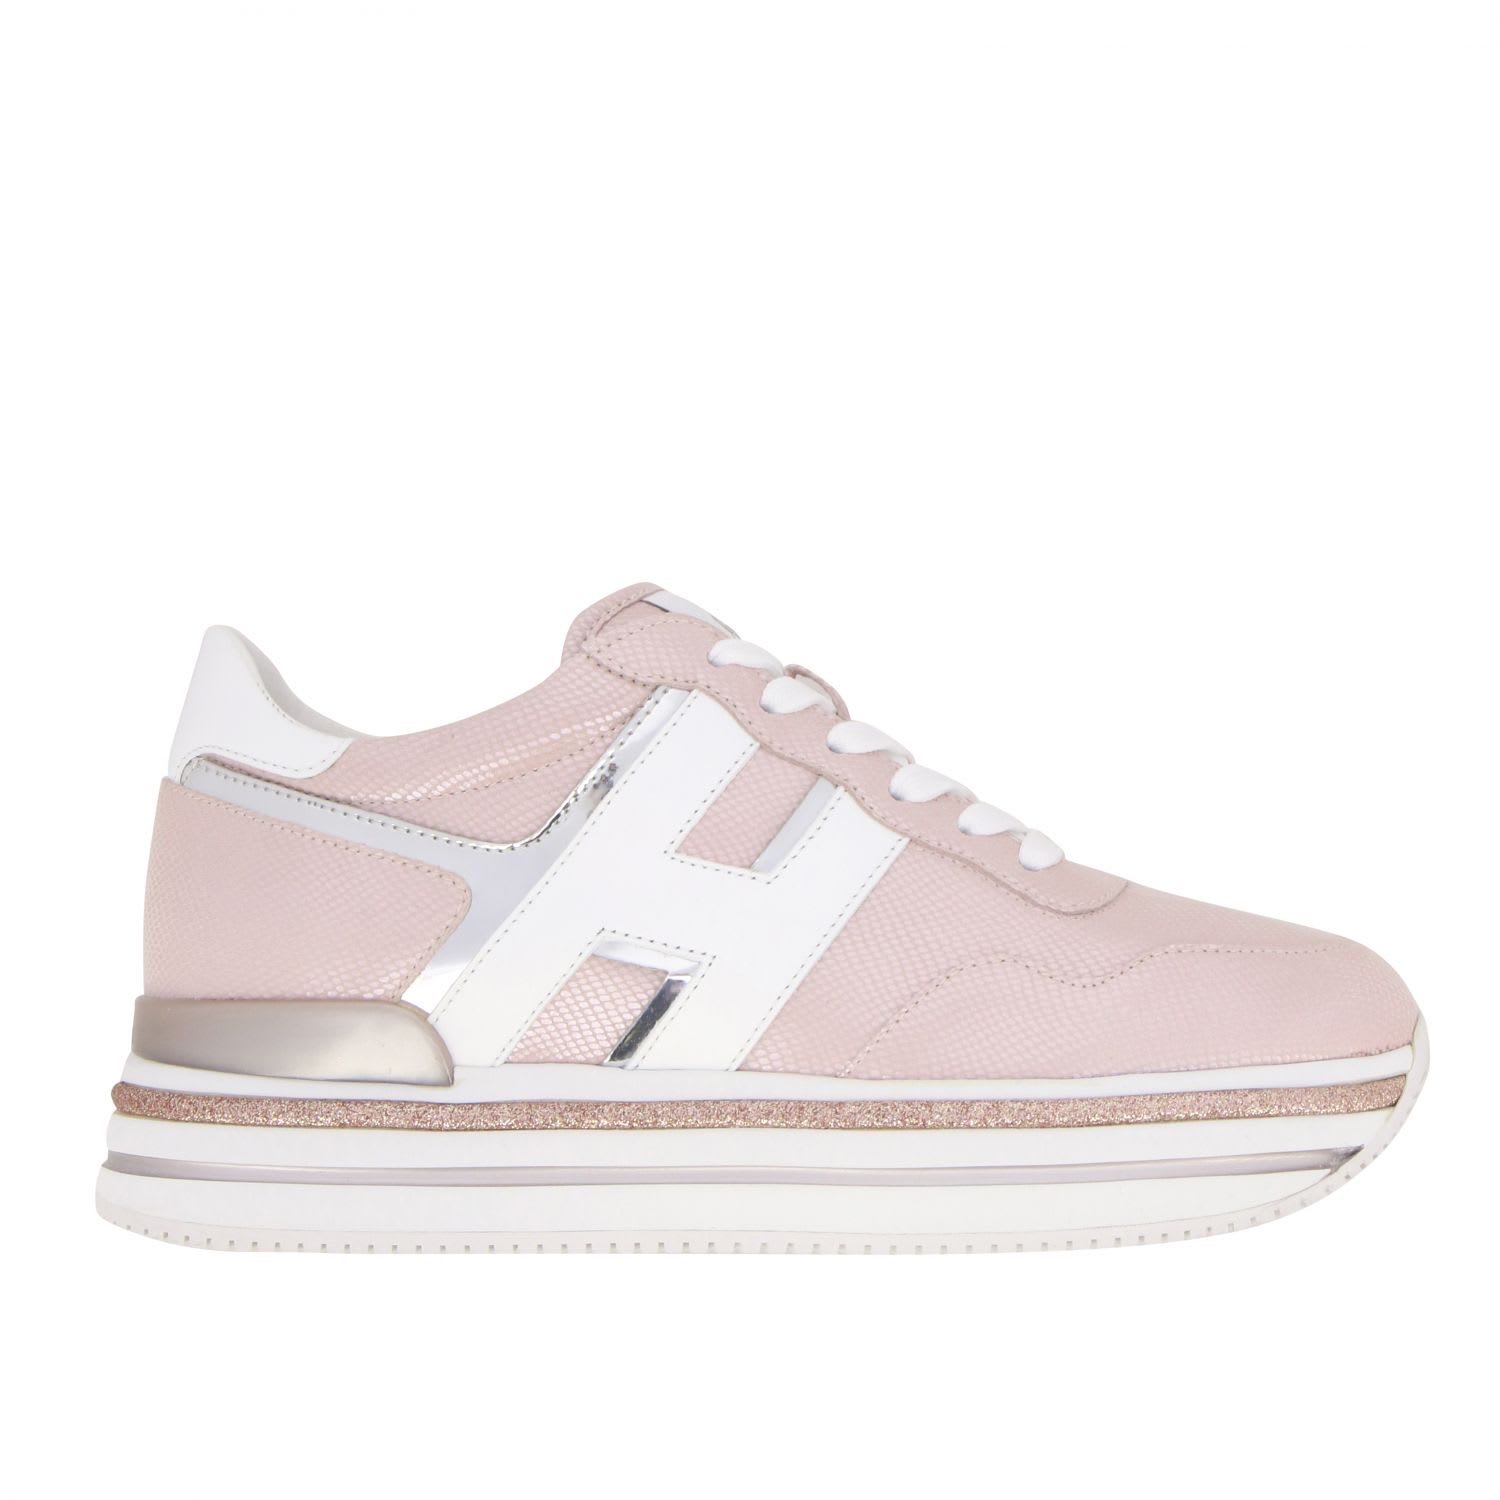 Hogan 468 Midi Platform Sneakers In Leather With Big H And Glitter Piping In Pink